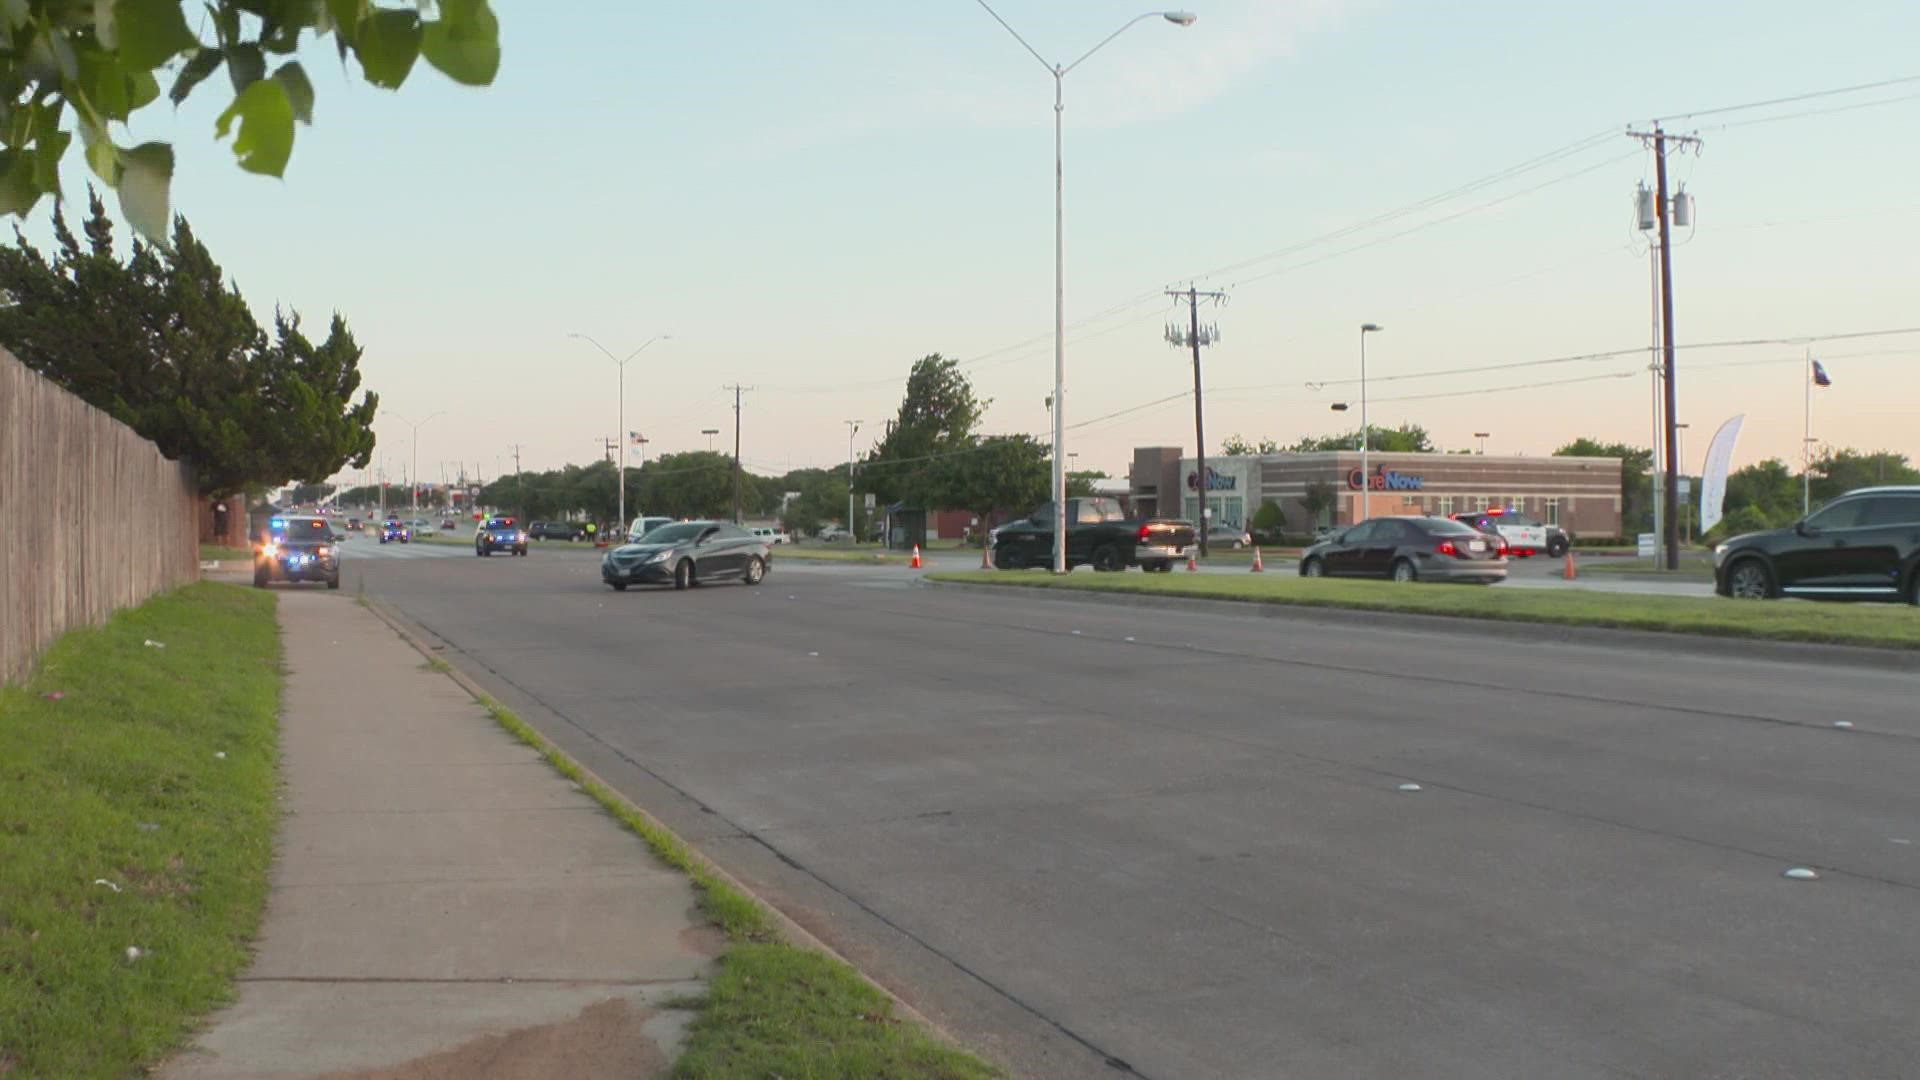 Three children and a woman have been hospitalized after a vehicle involved in a crash veered into a group of pedestrians Sunday evening, Fort Worth police said.